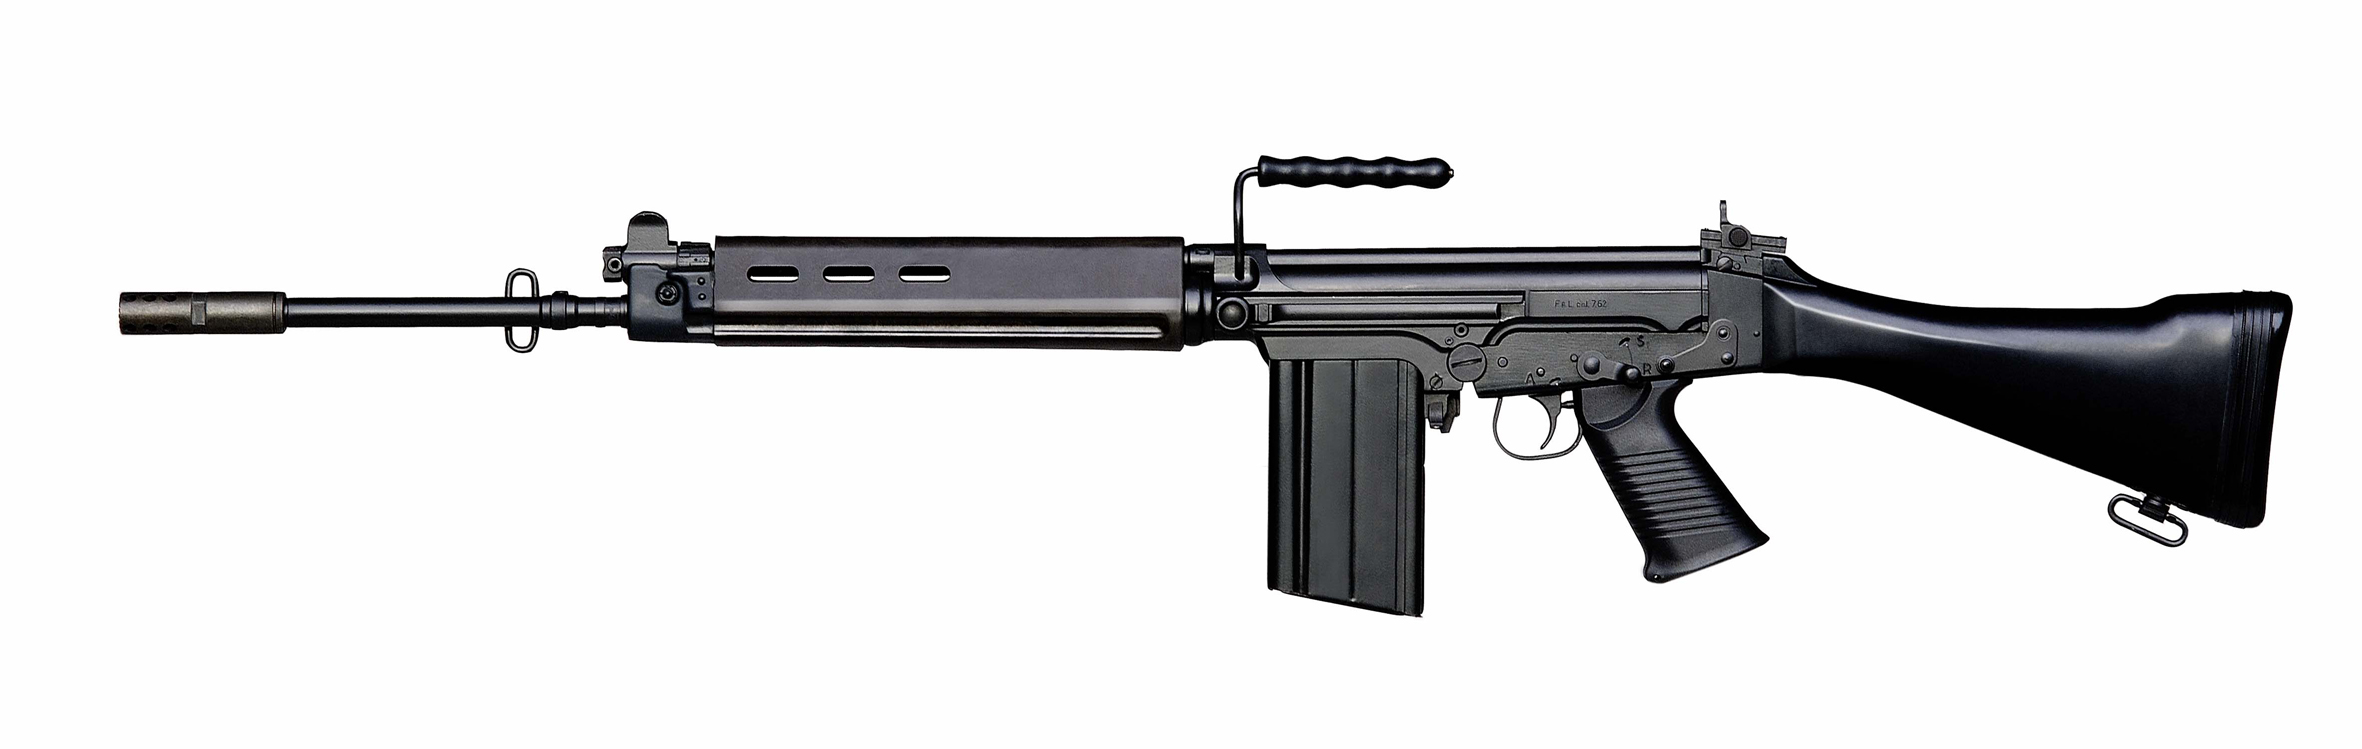 a rifle with black muzzle and no sights